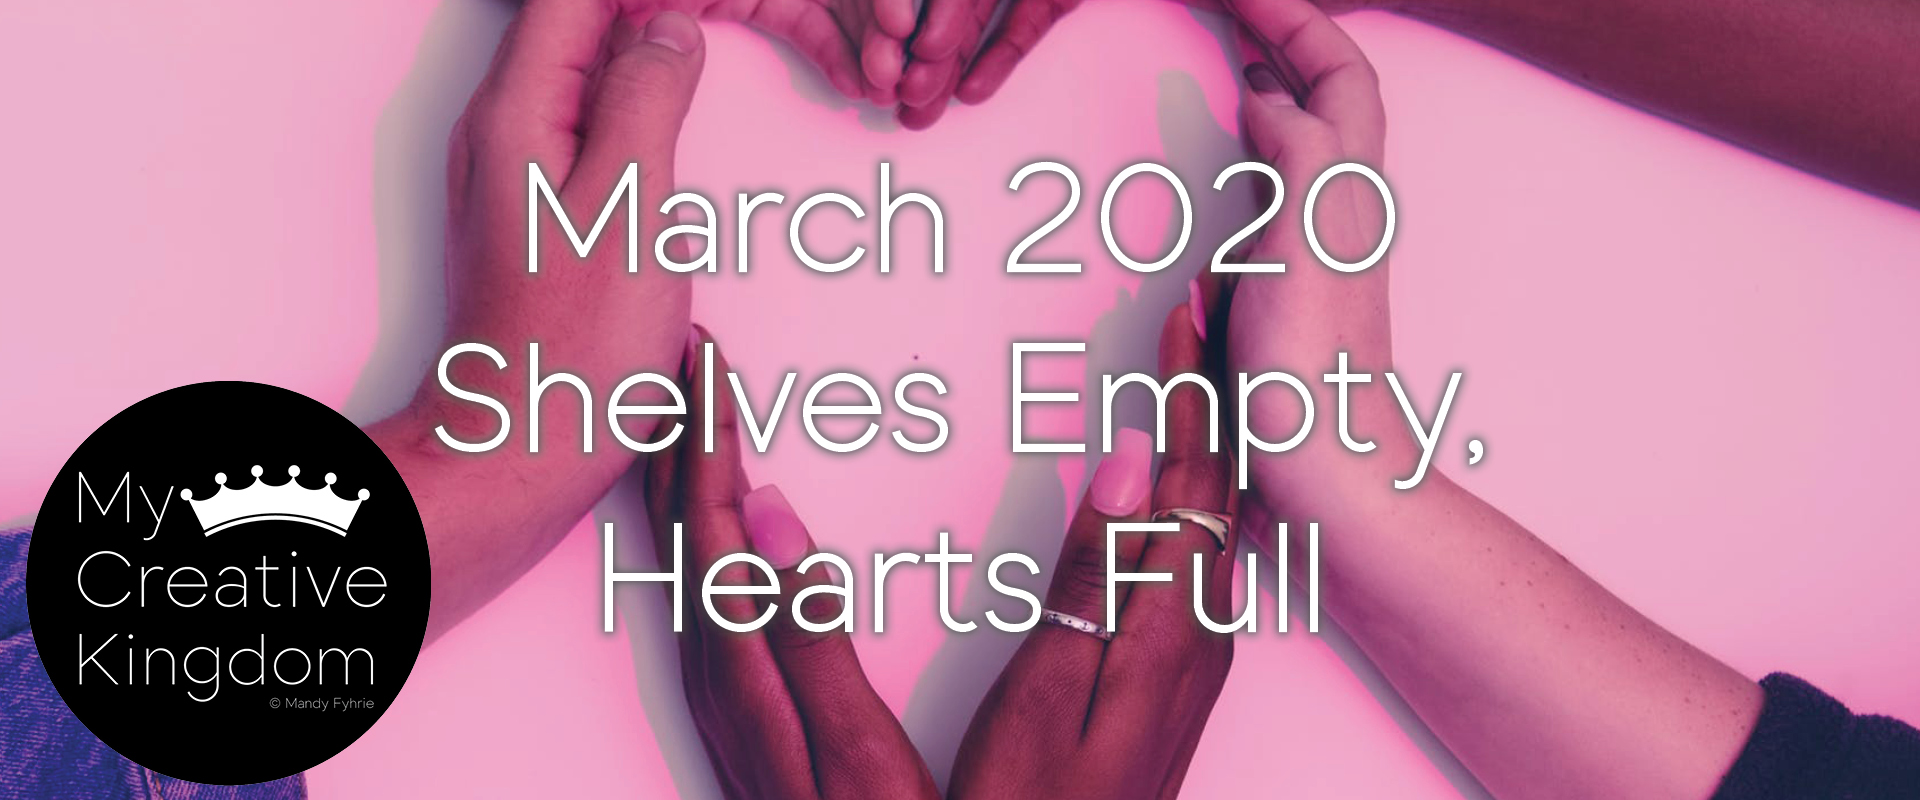 March 2020: Pockets & Shelves Empty, but Hearts Full